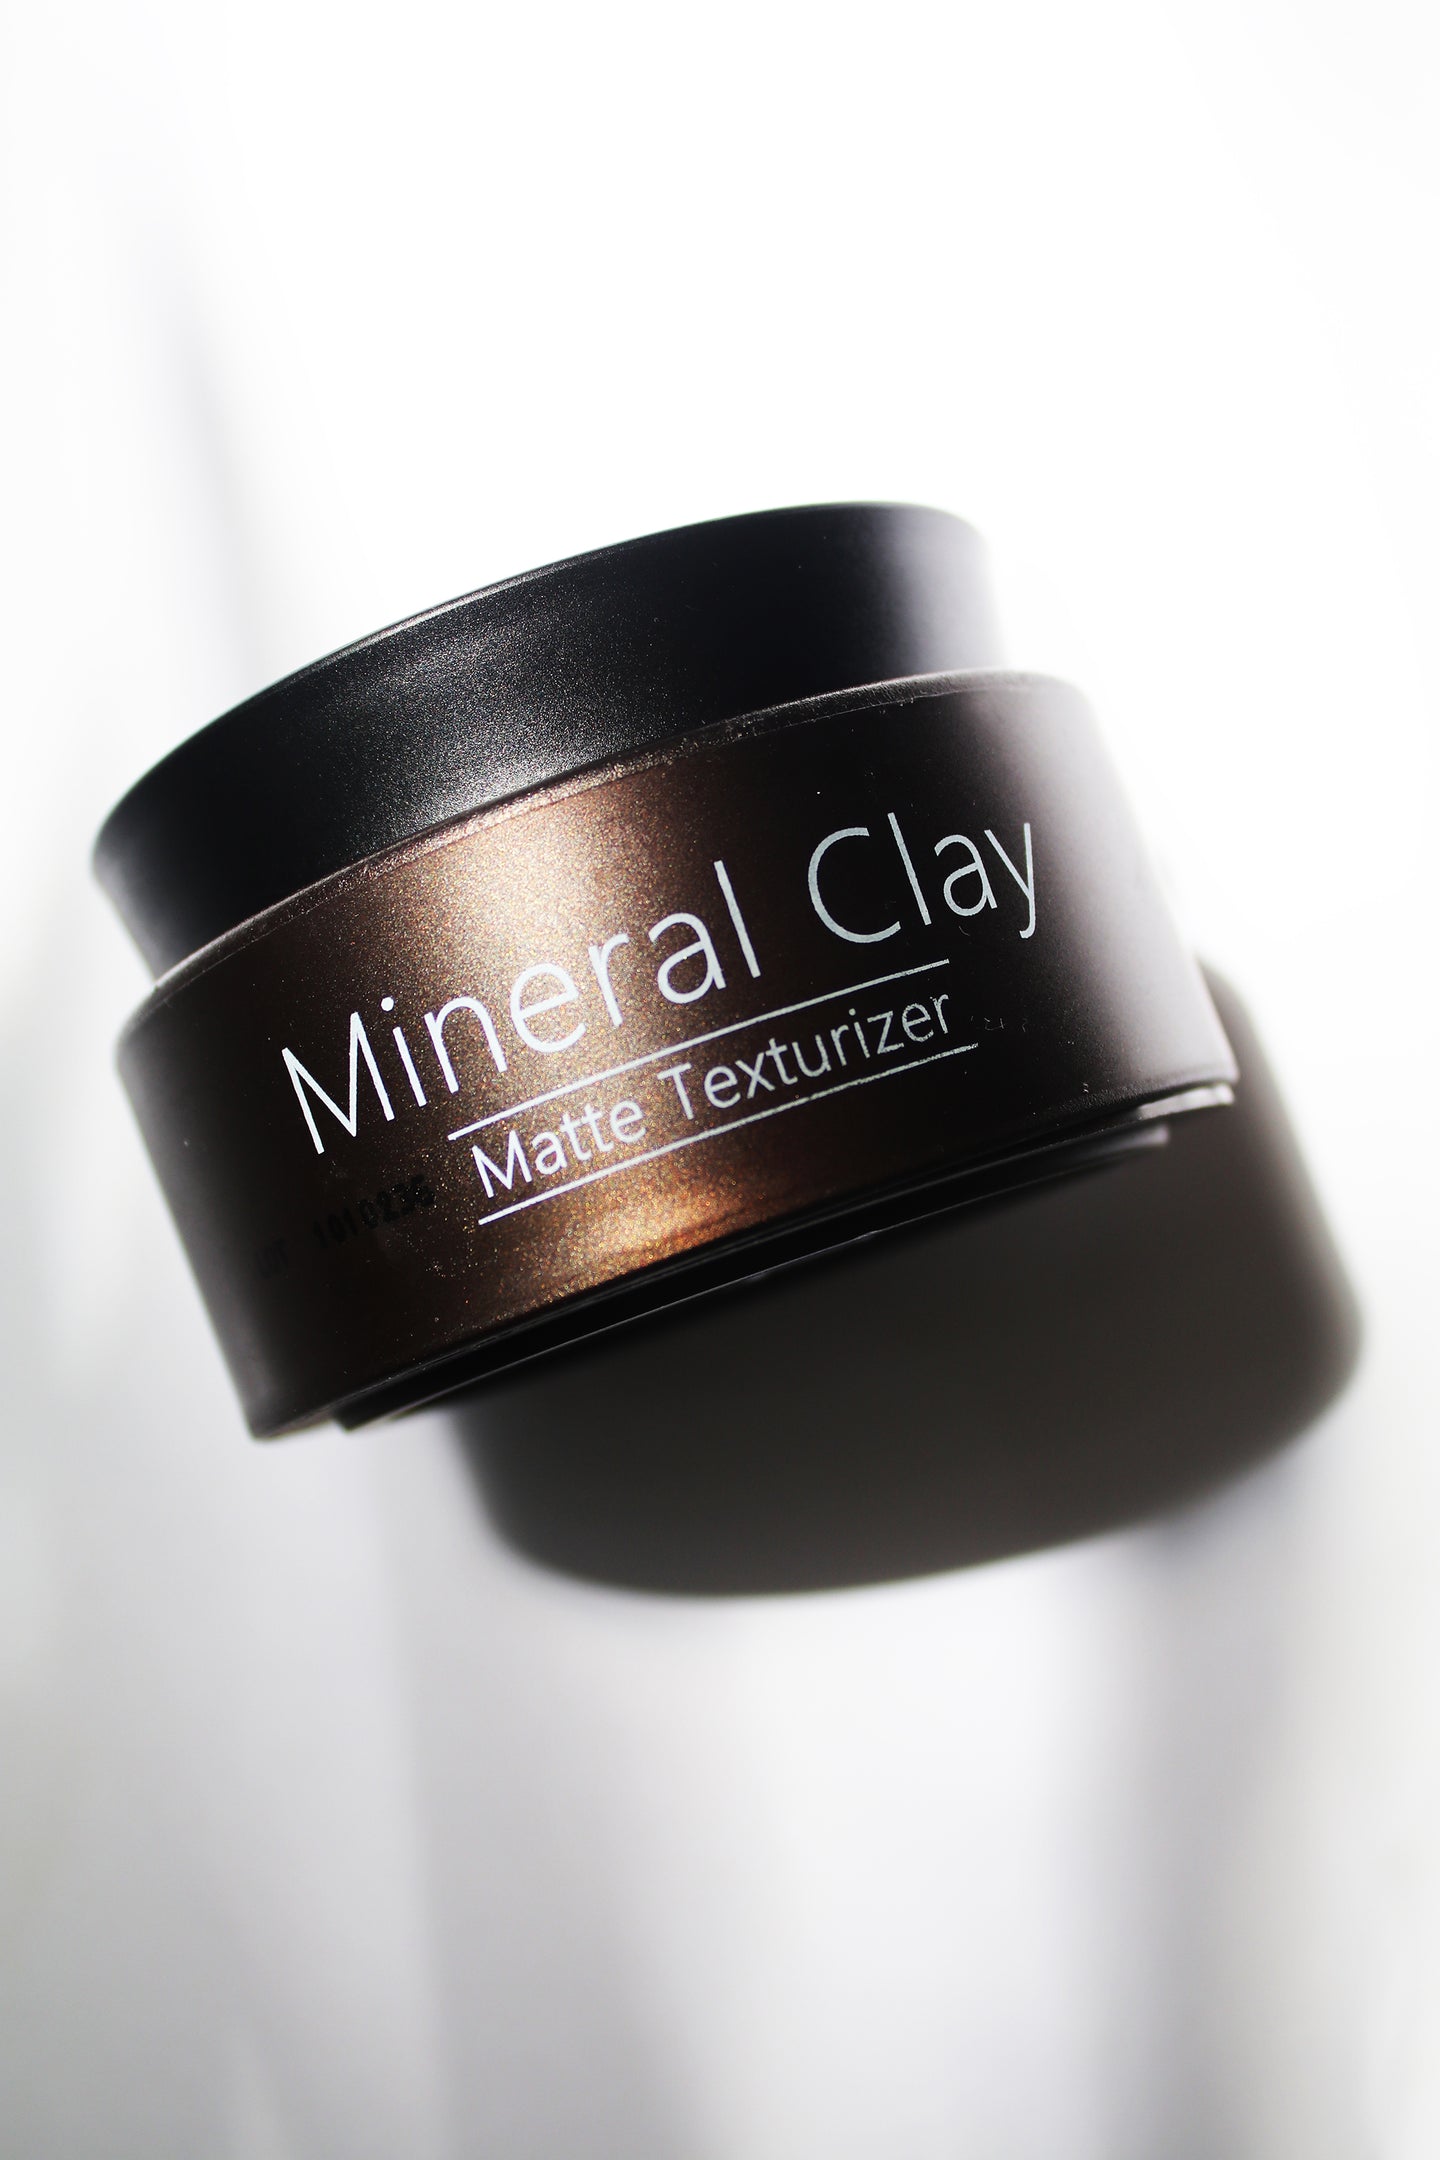 a jar of mineral clay texturizer by Davines